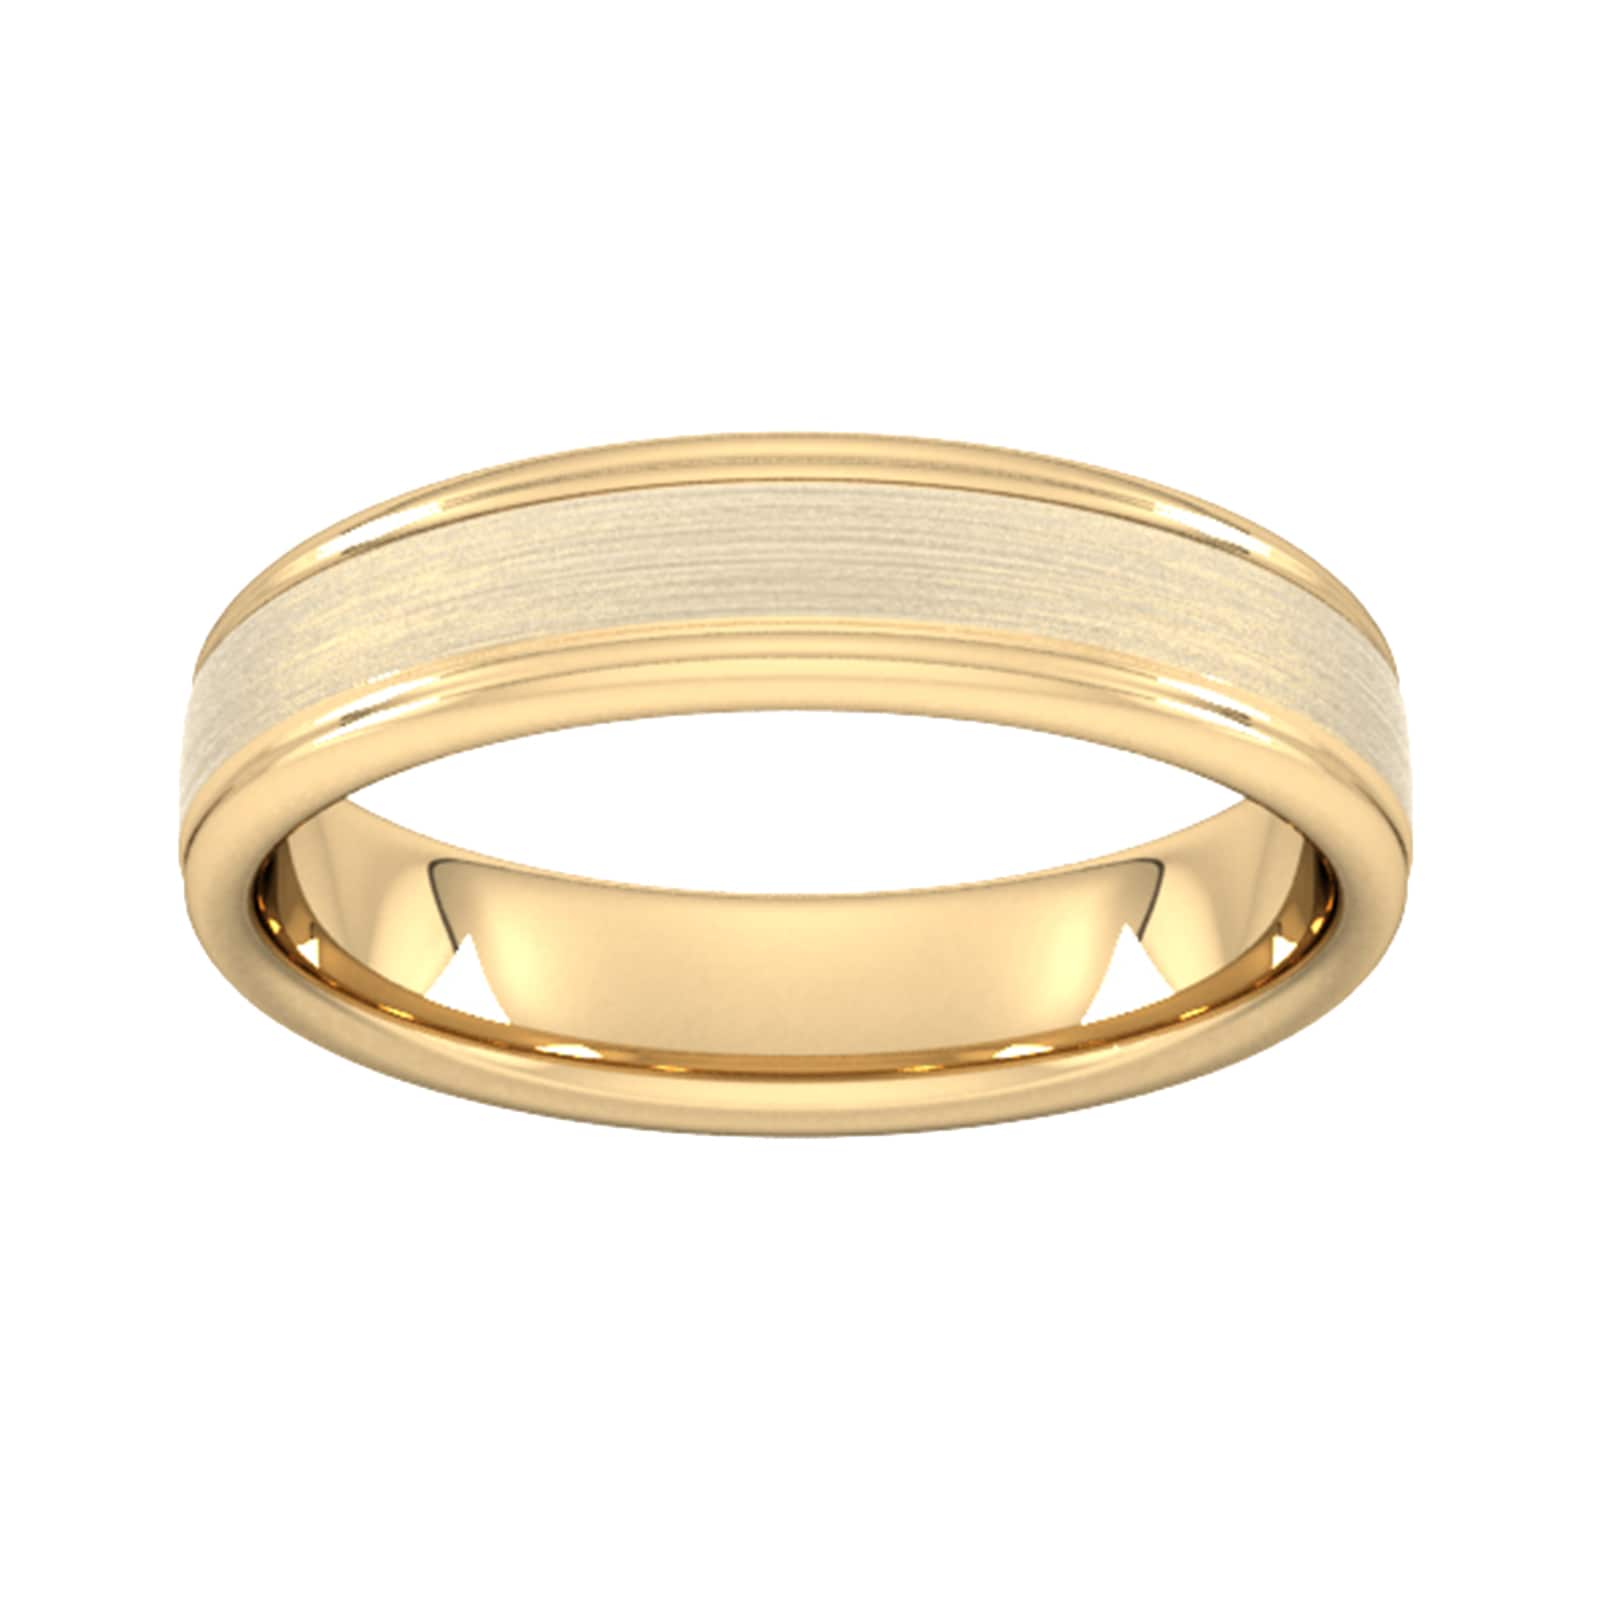 5mm Slight Court Extra Heavy Matt Centre With Grooves Wedding Ring In 9 Carat Yellow Gold - Ring Size X